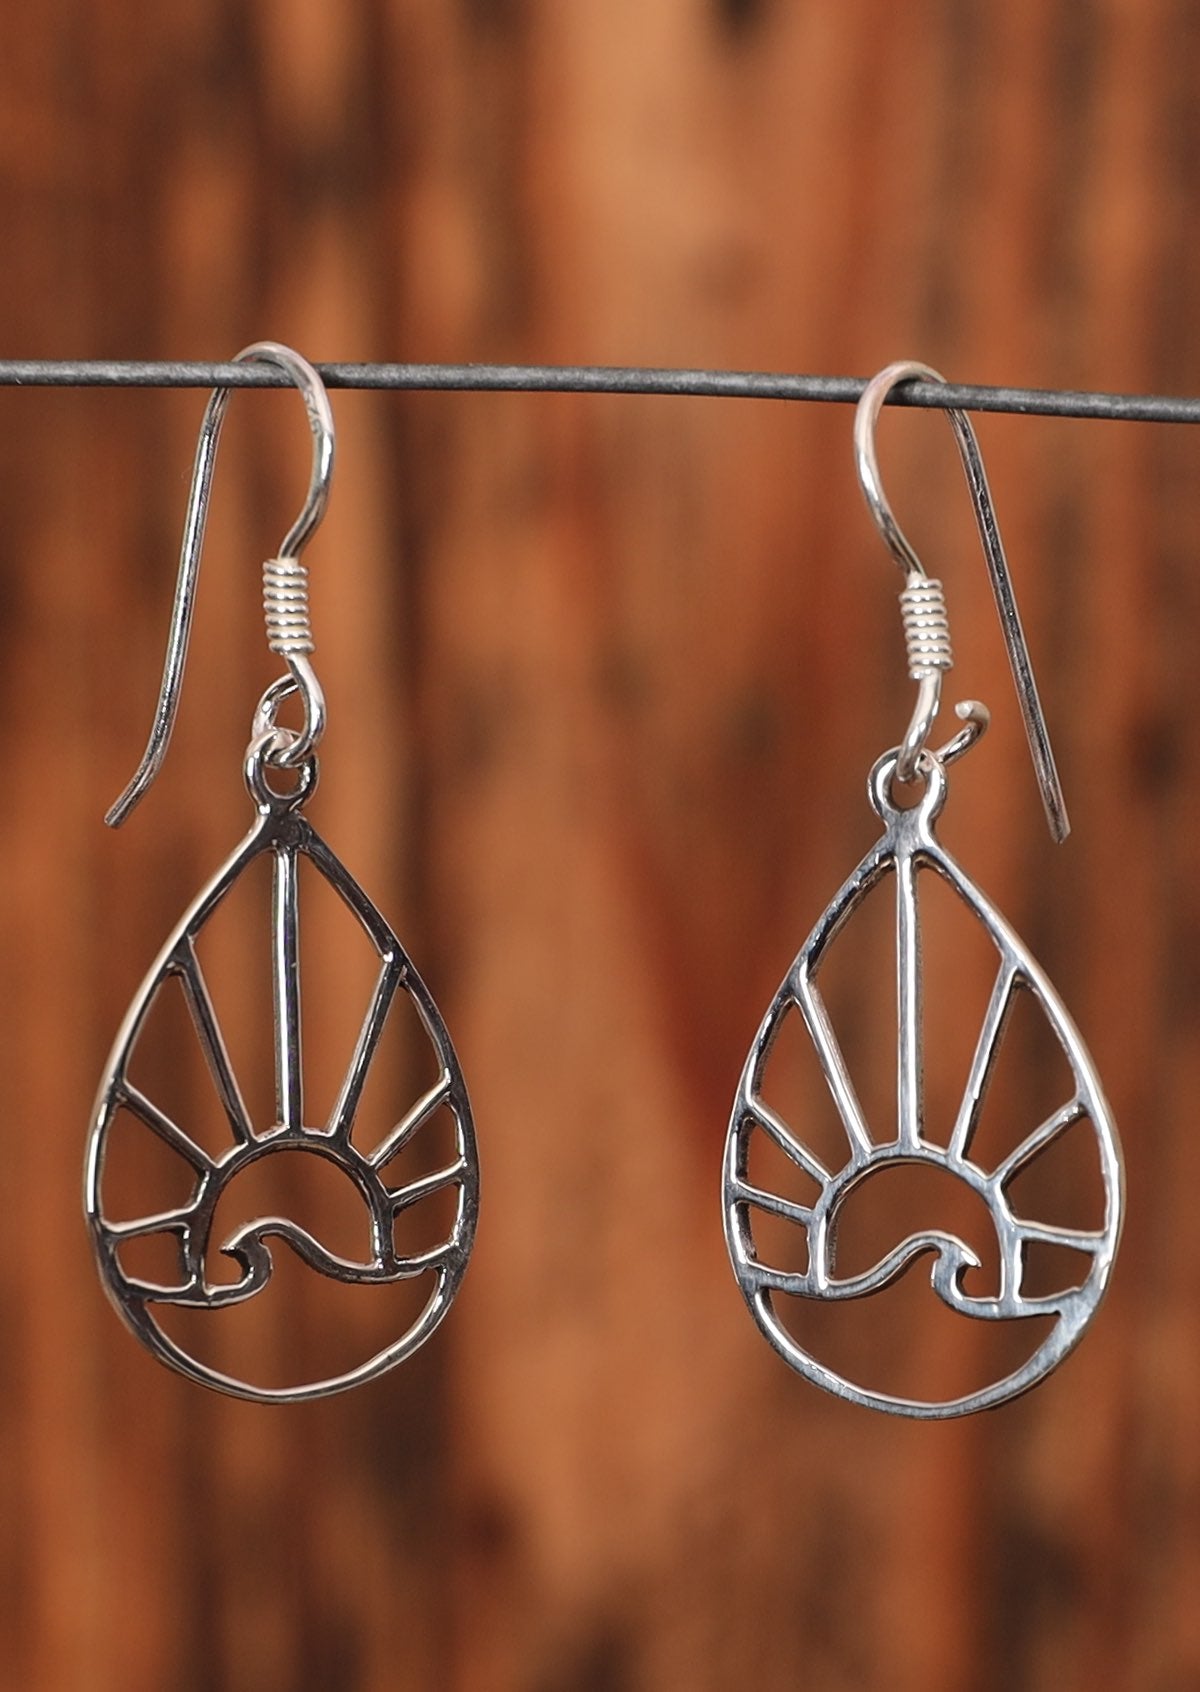 These 92.5% silver earrings are a teardrop shape with a sun and wave within it. The earrings sit on a wire for display.